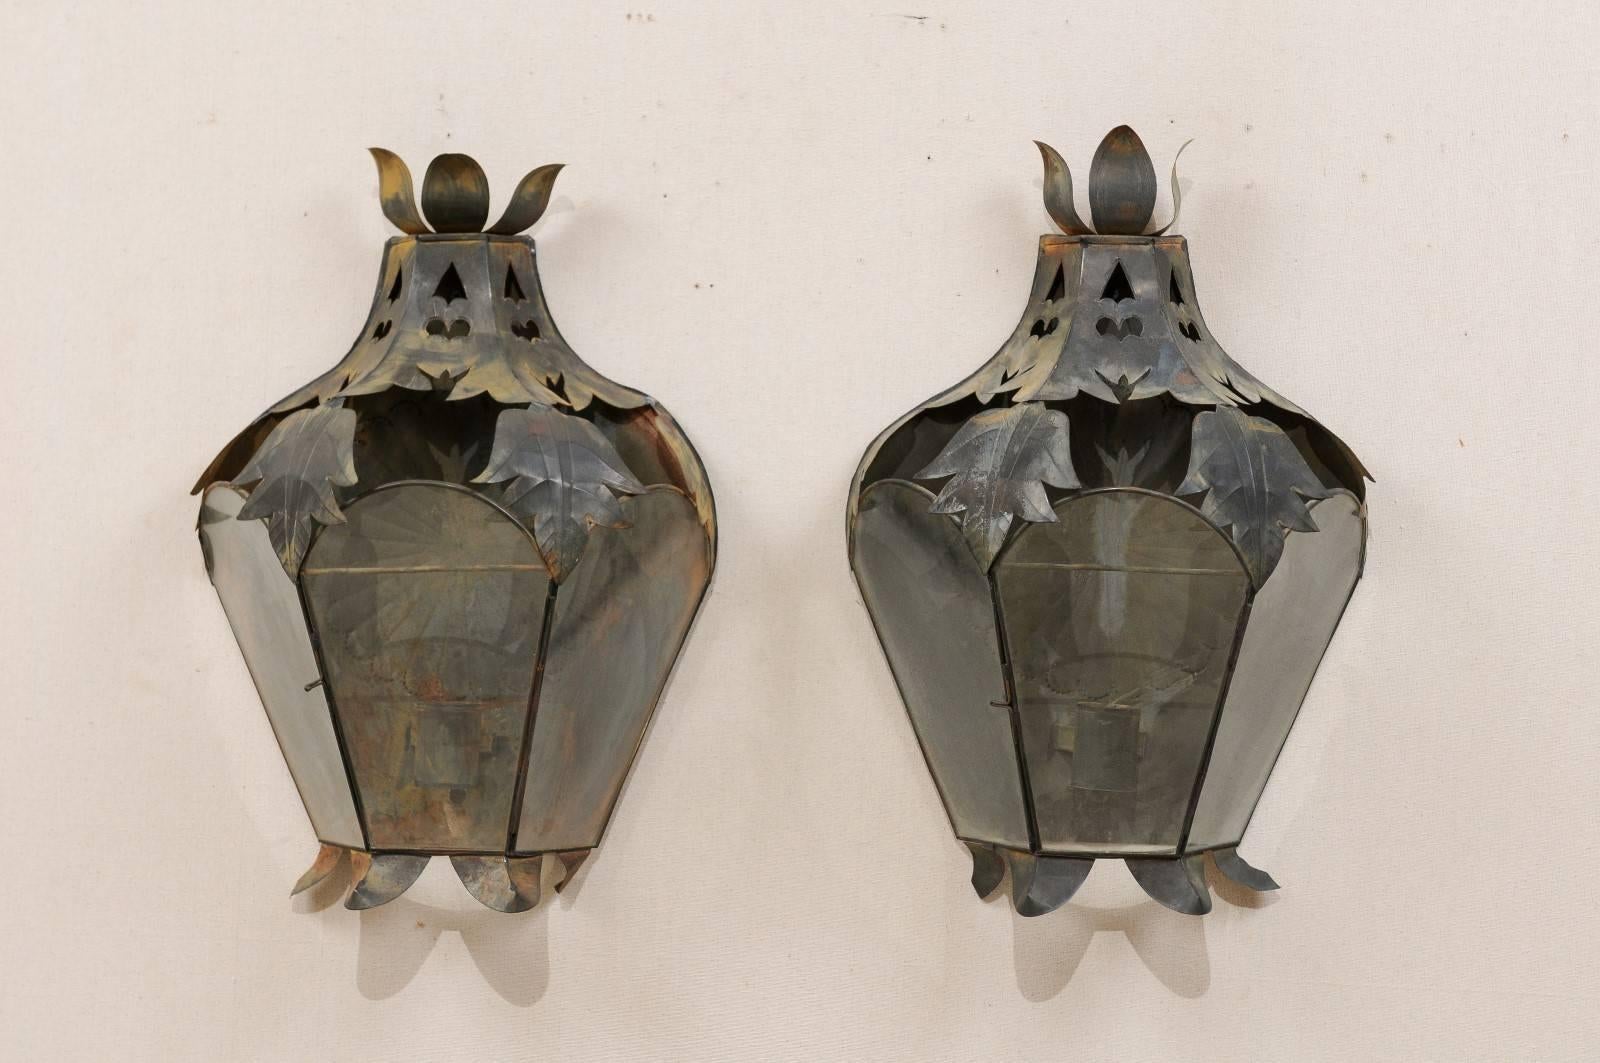 A pair of Mexican Folk Art sconces. This pair of Mexican single-candle sconces have been handcrafted from old tin, which has a nice, warm patina. This pair of Folk Art sconces are lantern style and would look charming set with a single candle in